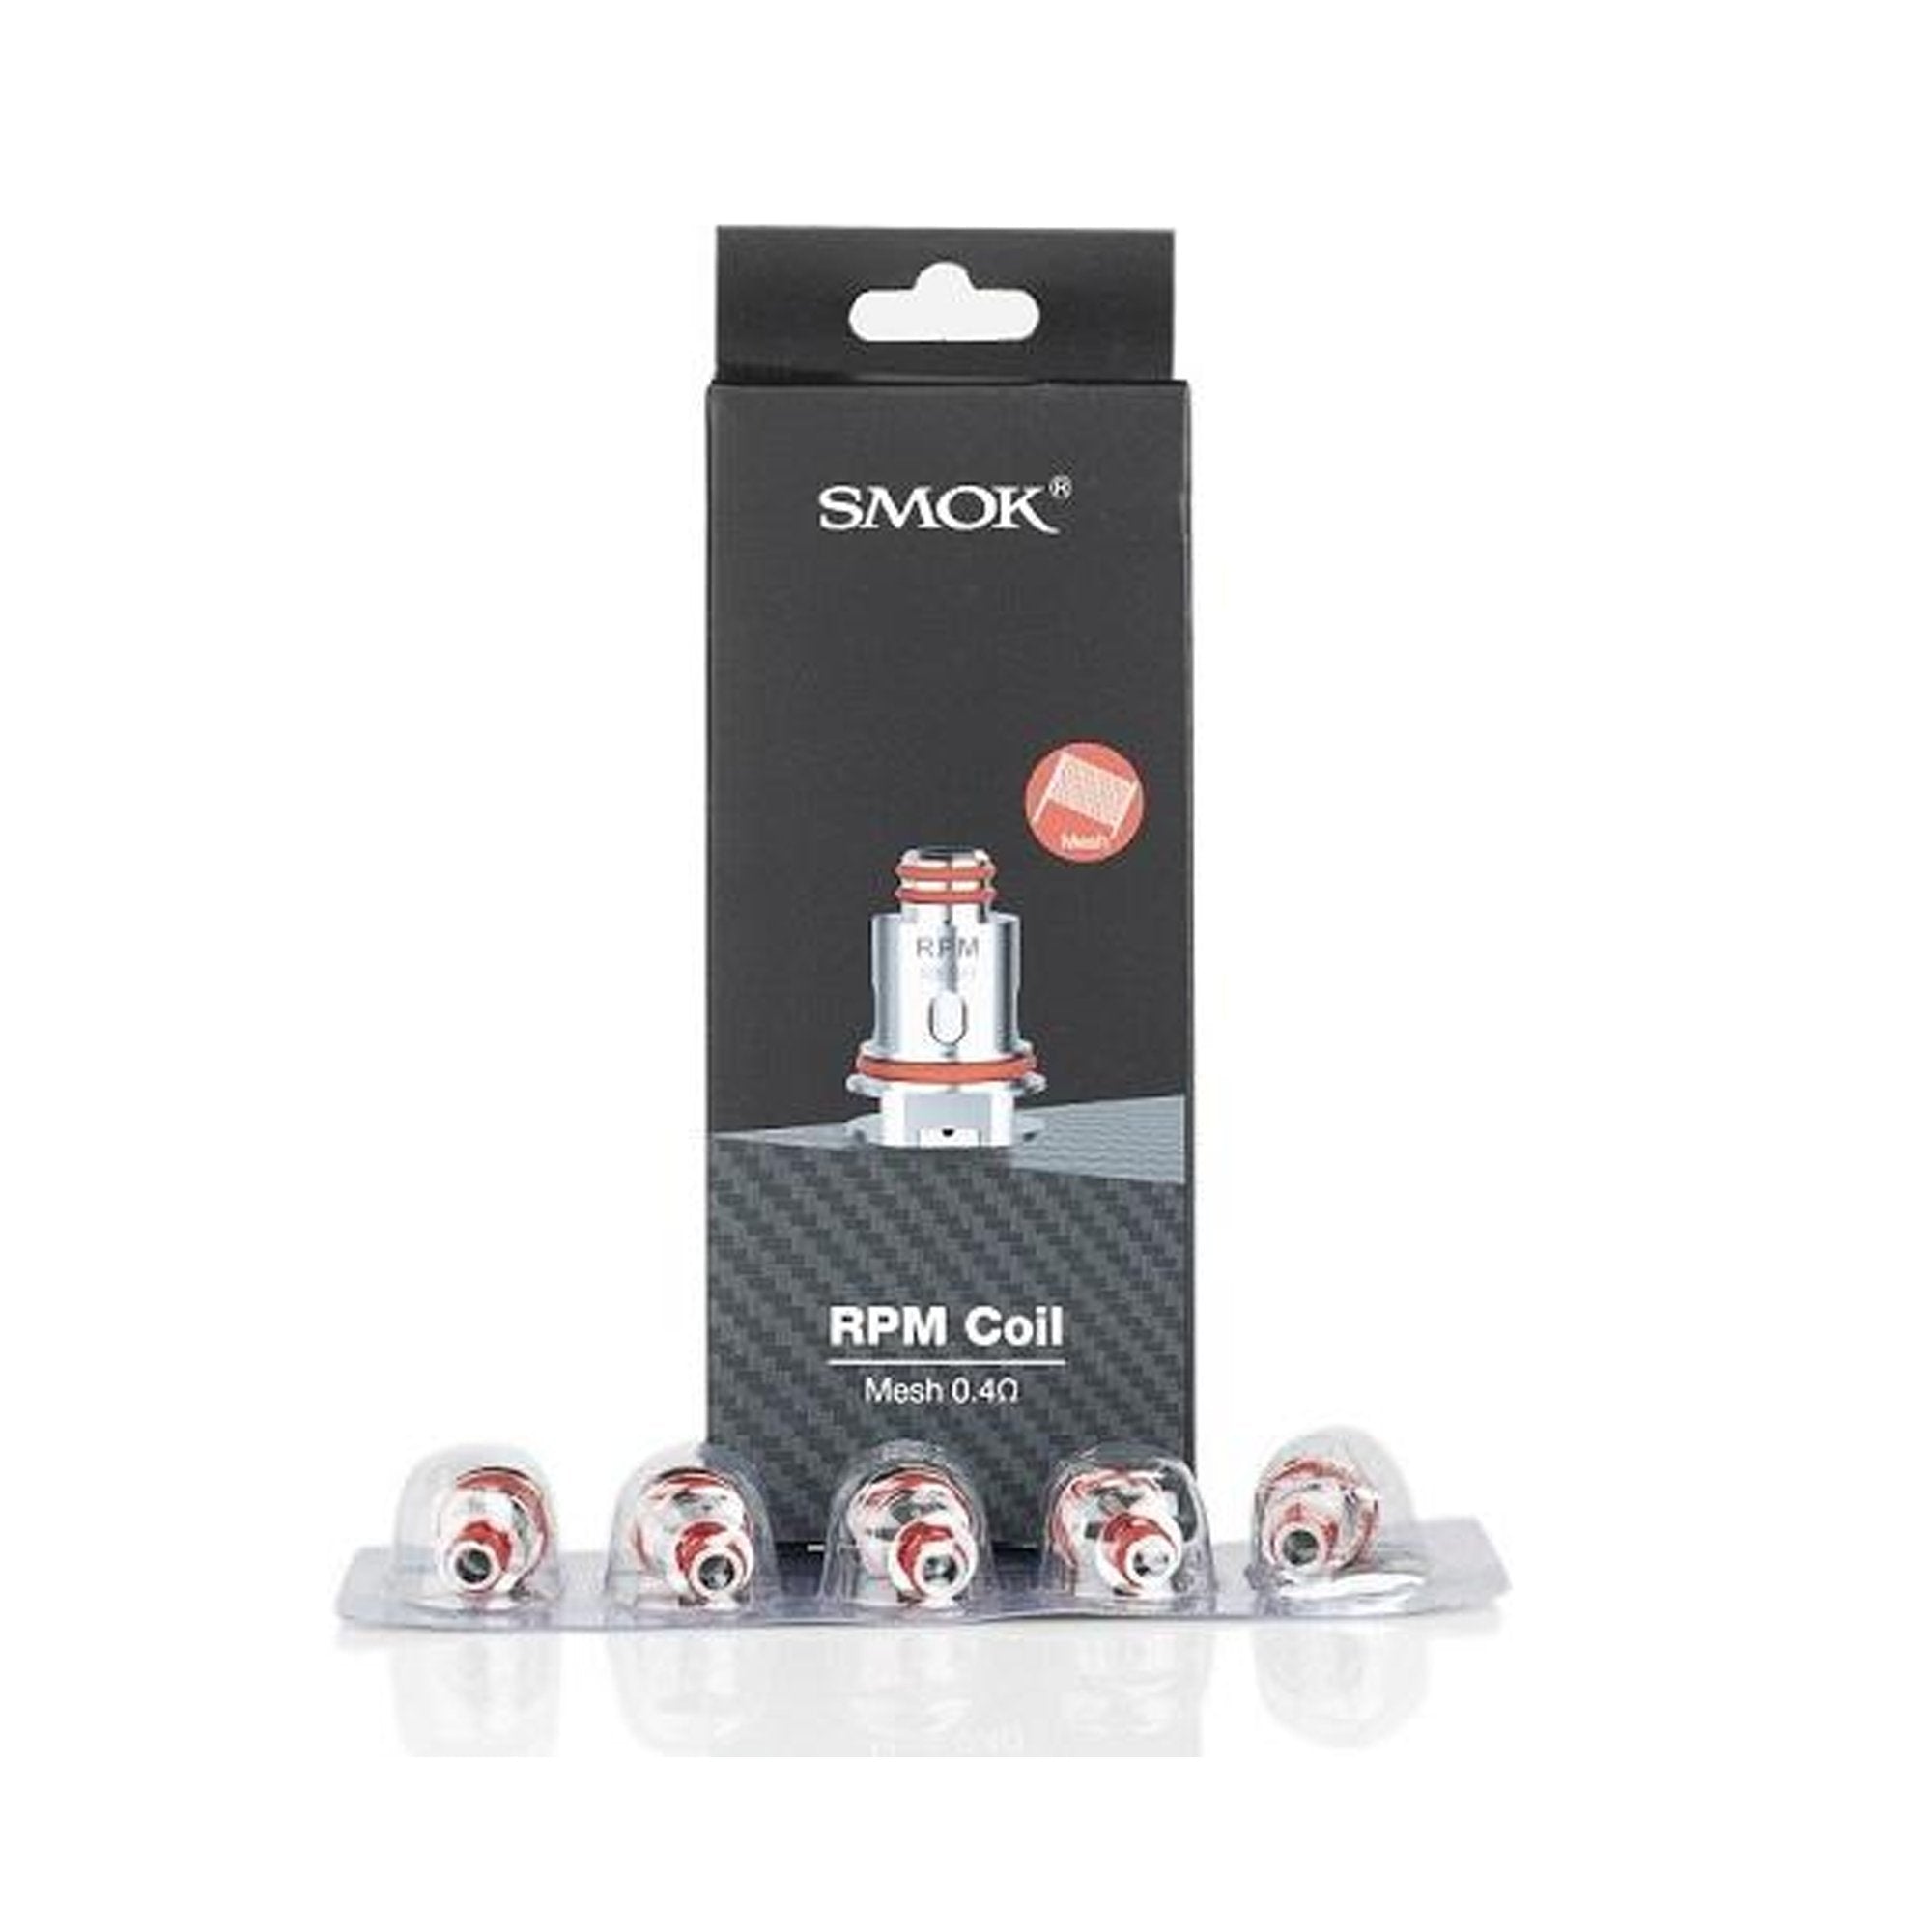 SMOK RPM40 Replacement Coils | 5 Pack | Wolfvapes - Wolfvapes.co.uk-0.4OHM RPM MESH COIL